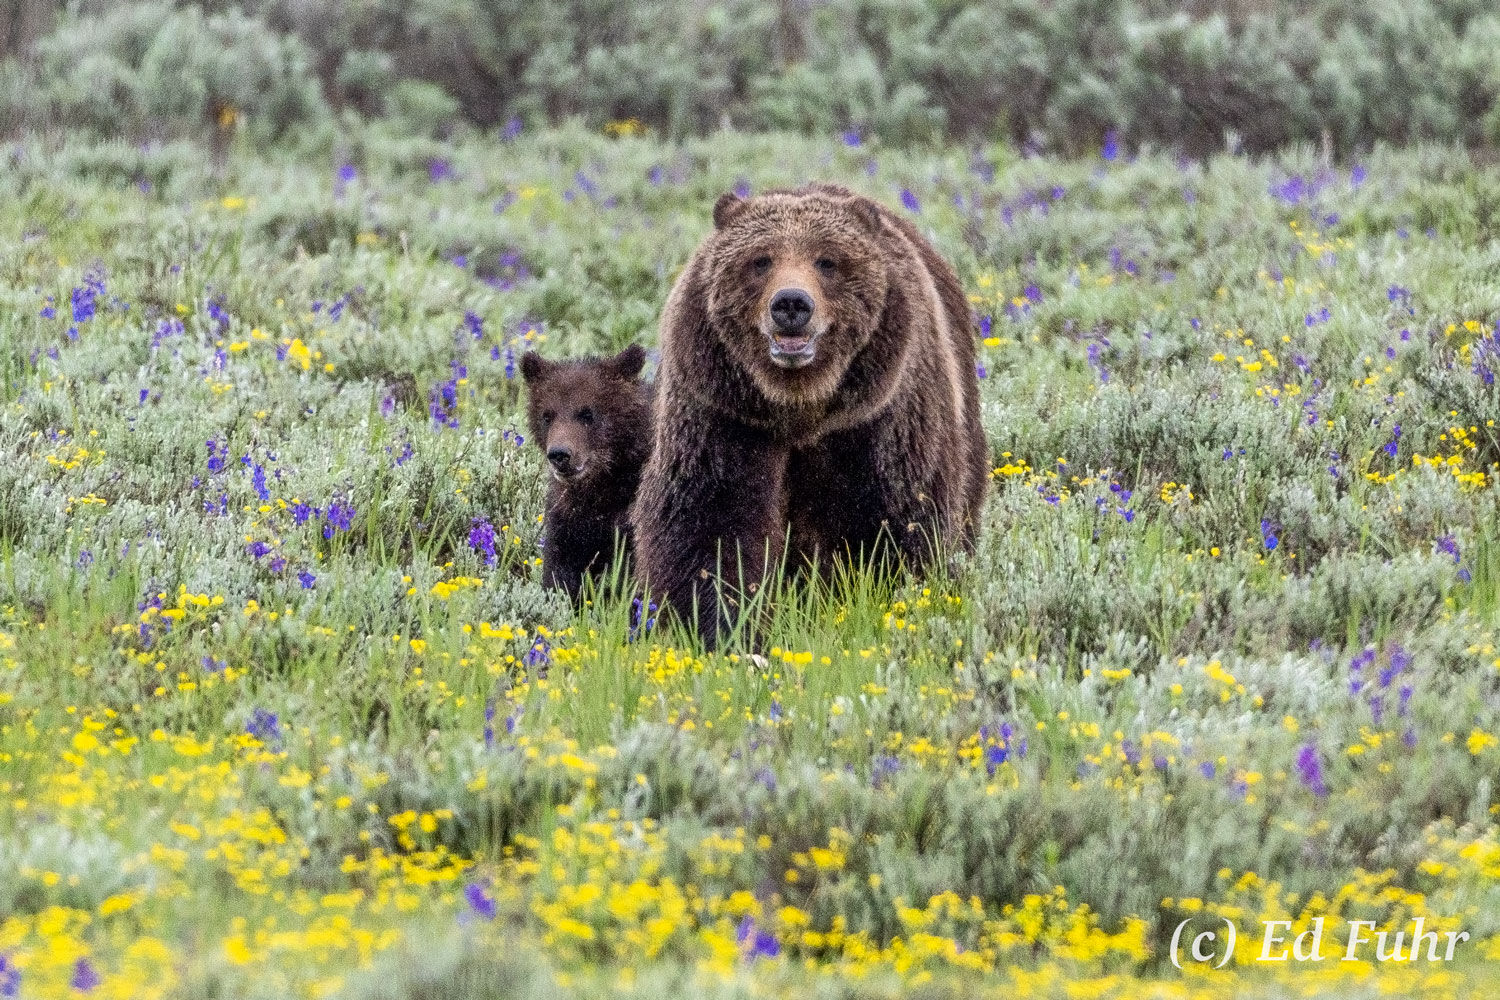 Grizzly 399 emerges this Spring with a new cub in tow, following sets of three and four.  At 27 years old, she is the oldest...